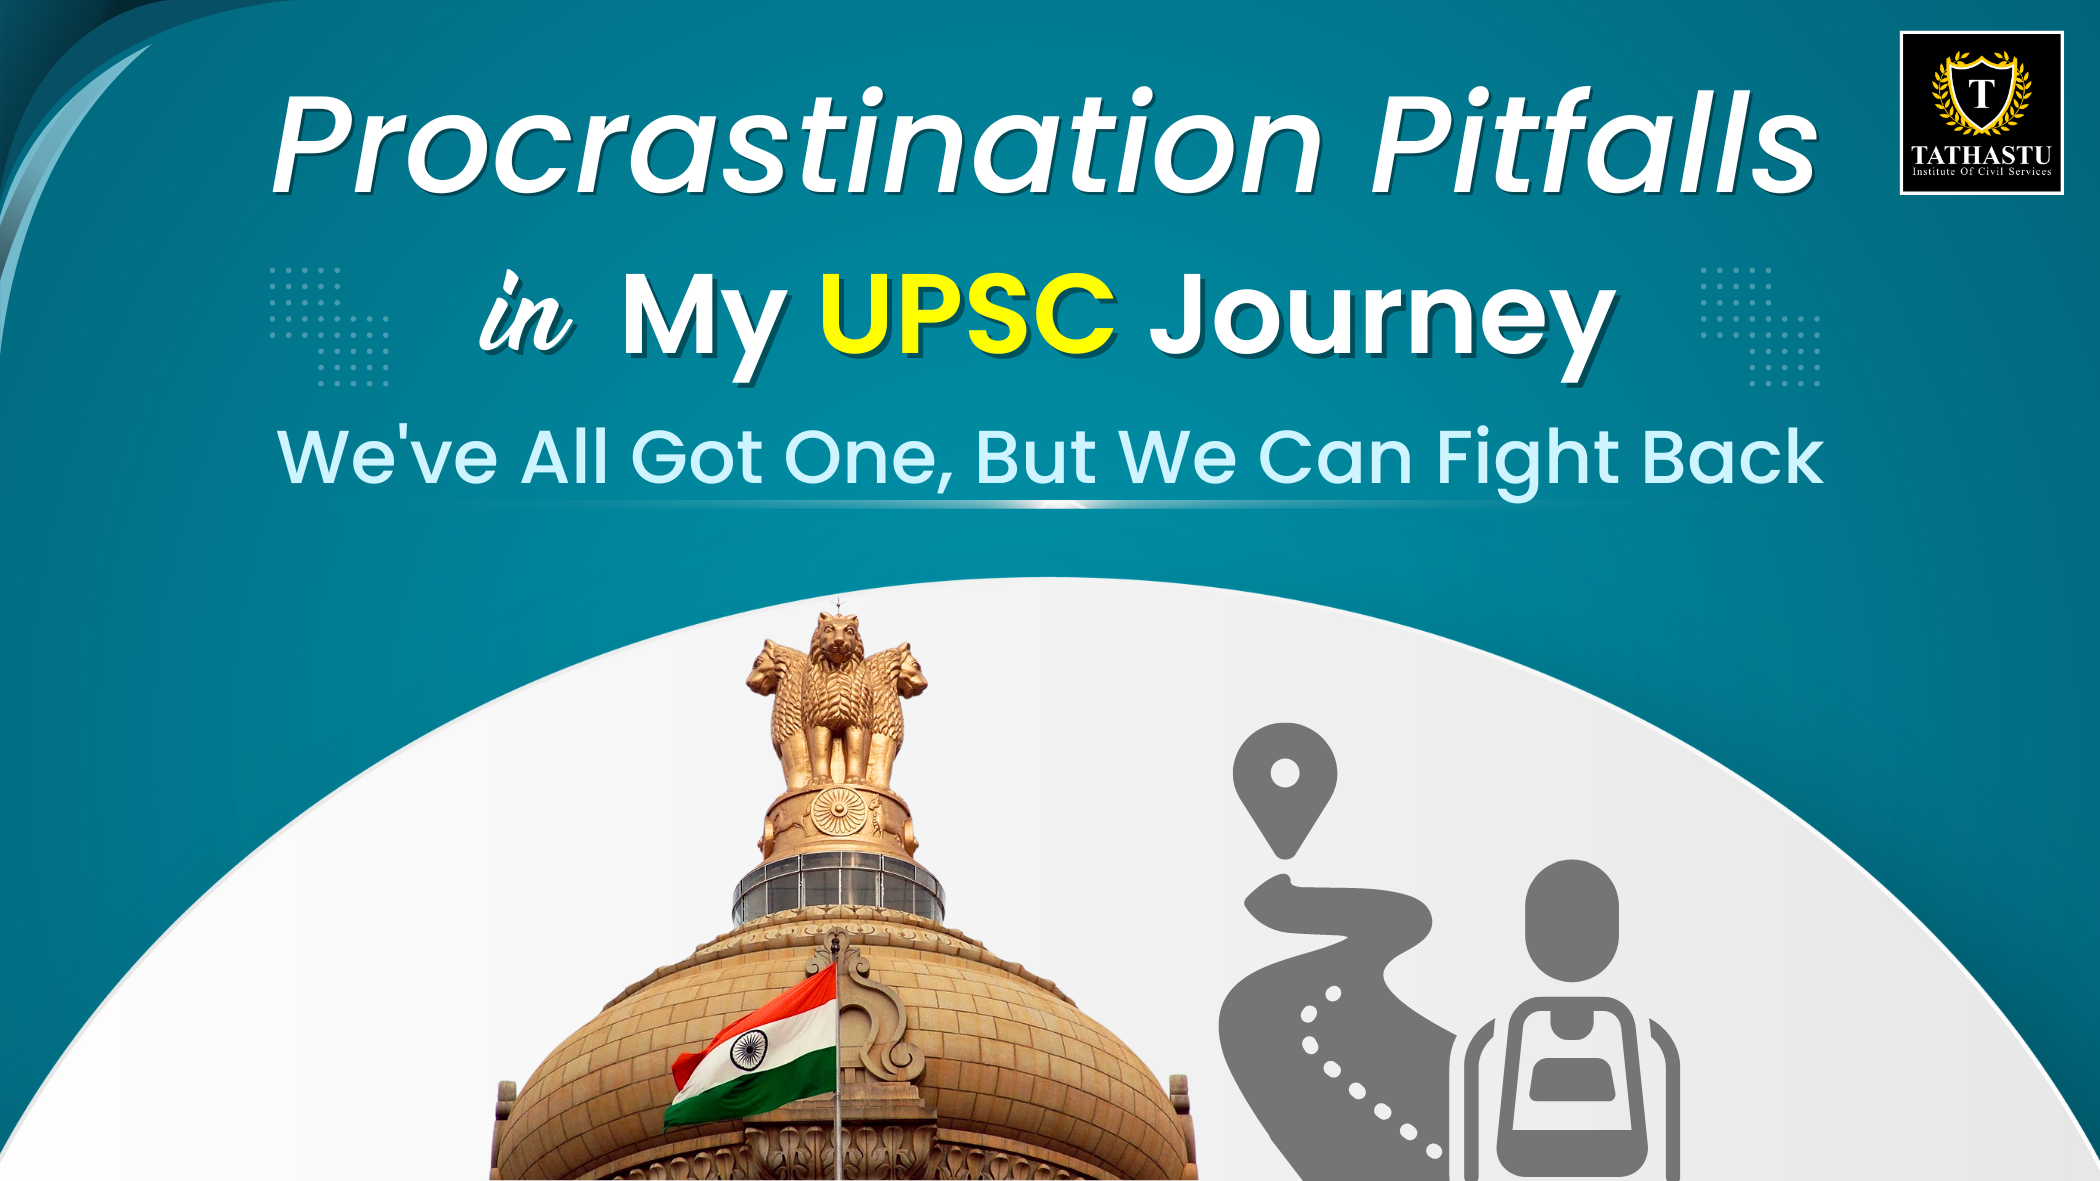 Procrastination Pitfalls in My UPSC Journey: We've All Got One, But We Can Fight Back